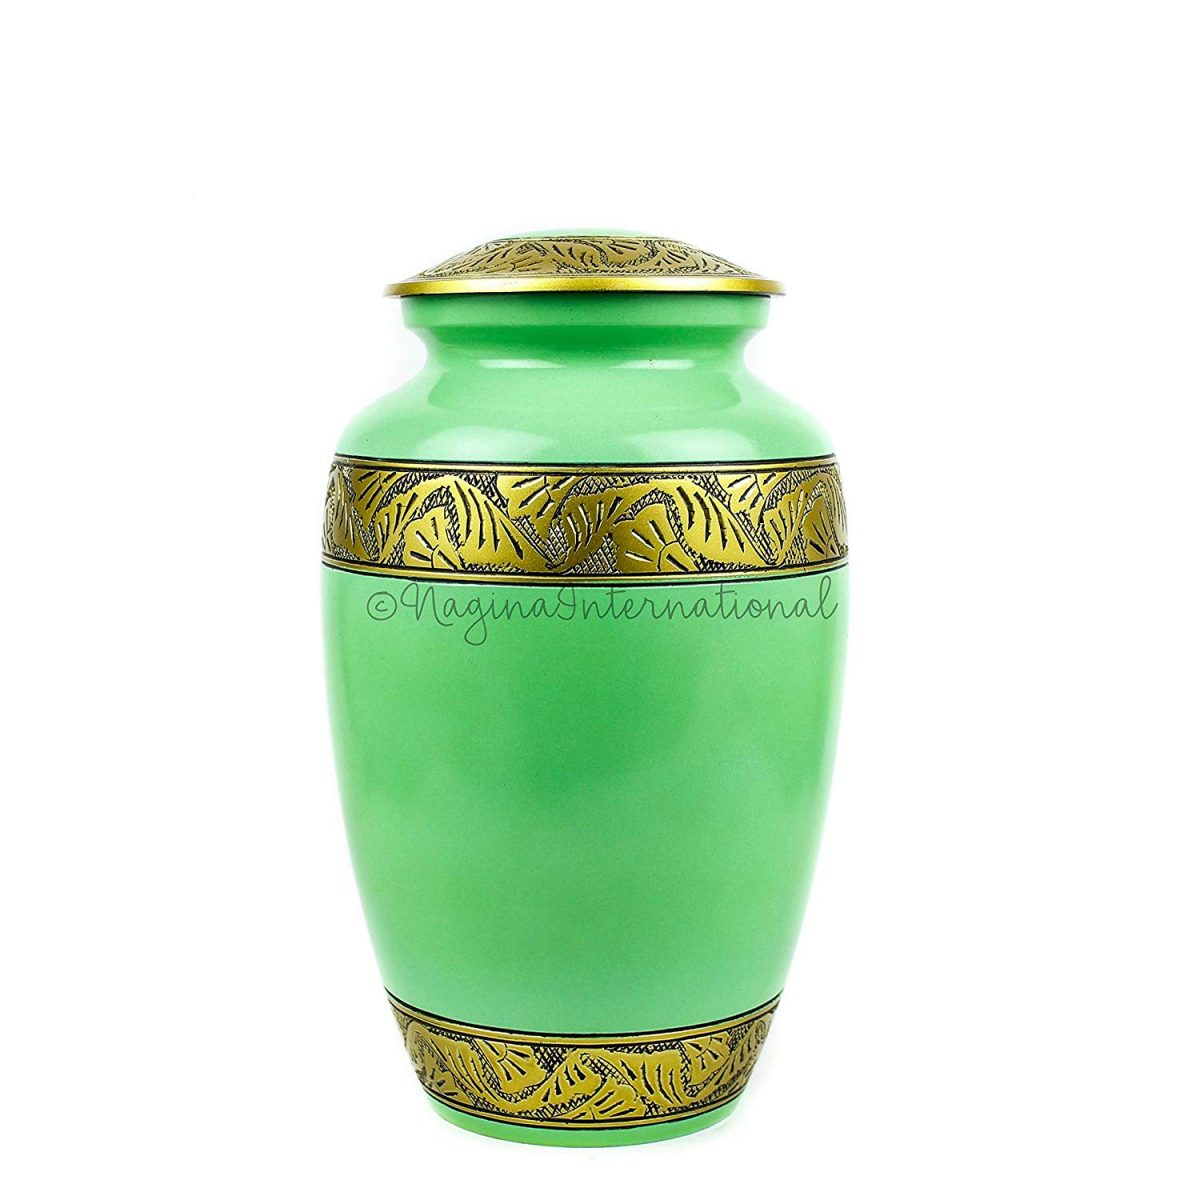 Aluminum Metal Cremation Urns for Ashes & Mortal Remains | Handmade Beautiful Urns for Humans and Pets (Penciled Green)